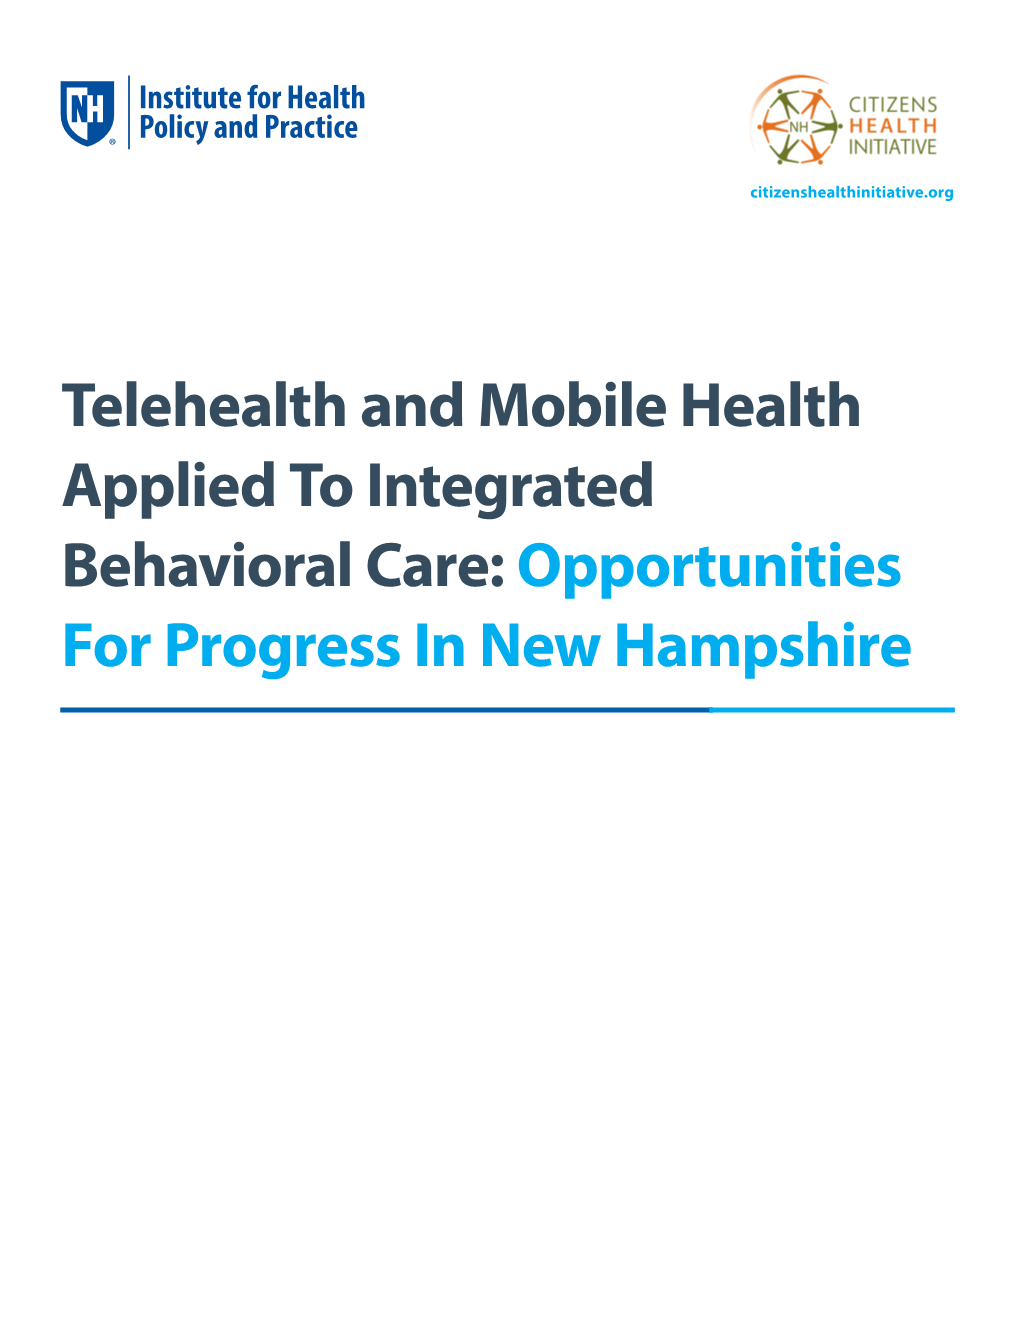 Telehealth and Mobile Health Applied to Integrated Behavioral Care